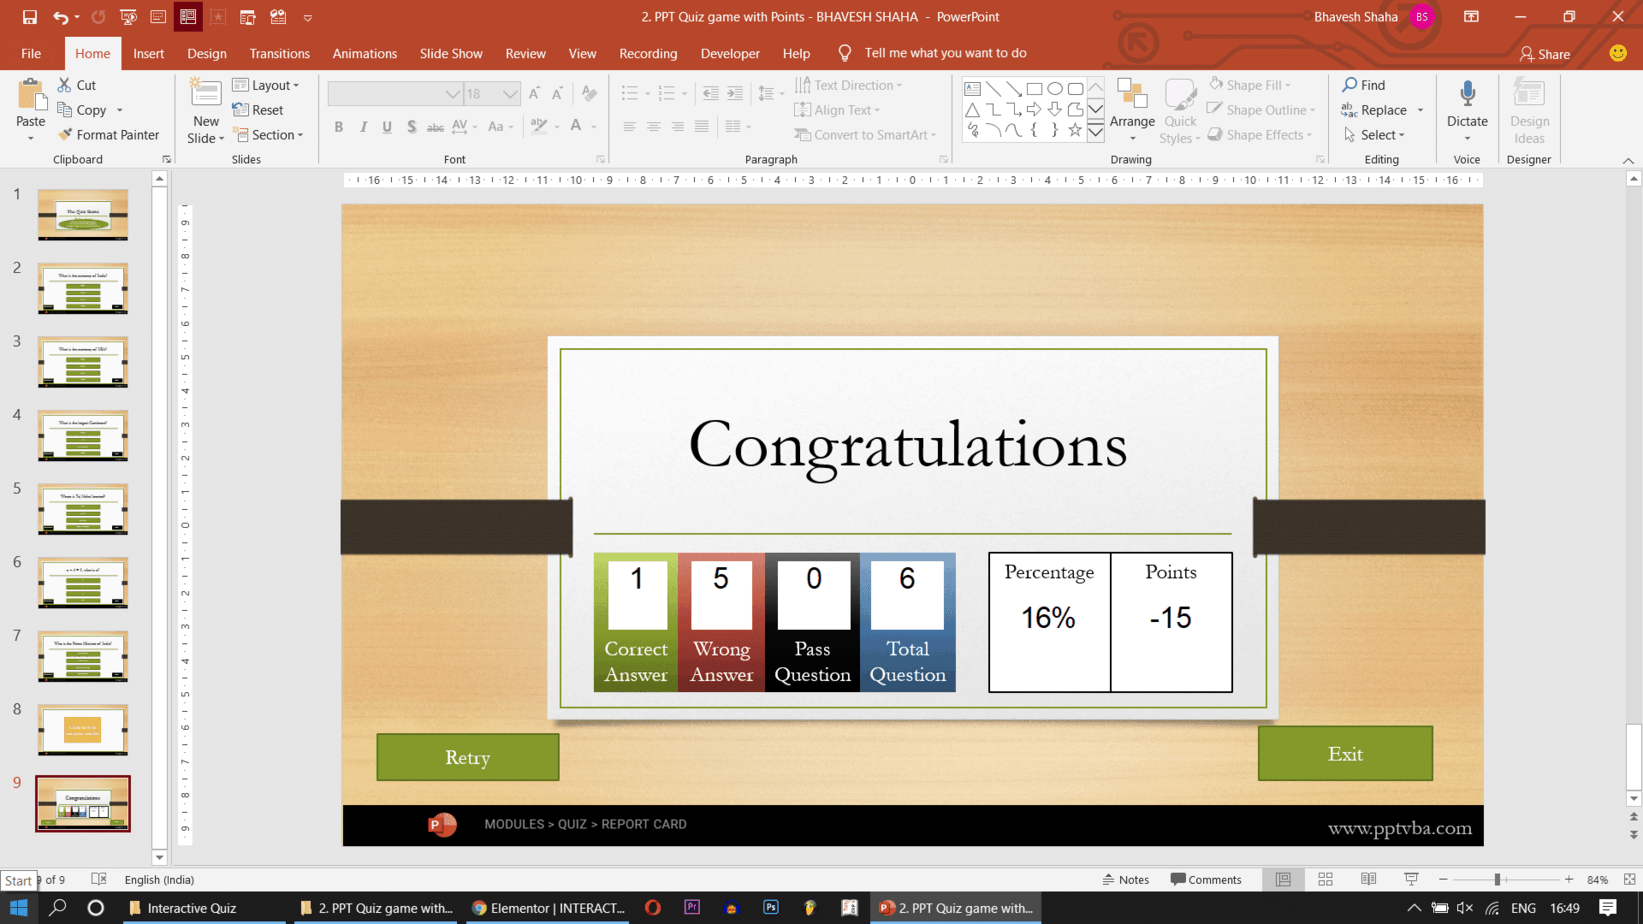 PPT QUiz game with score points and reportcard and grade - REPORT CARD AND PERCENTAGE - INTERACTIVE POWERPOINT QUIZ GAME